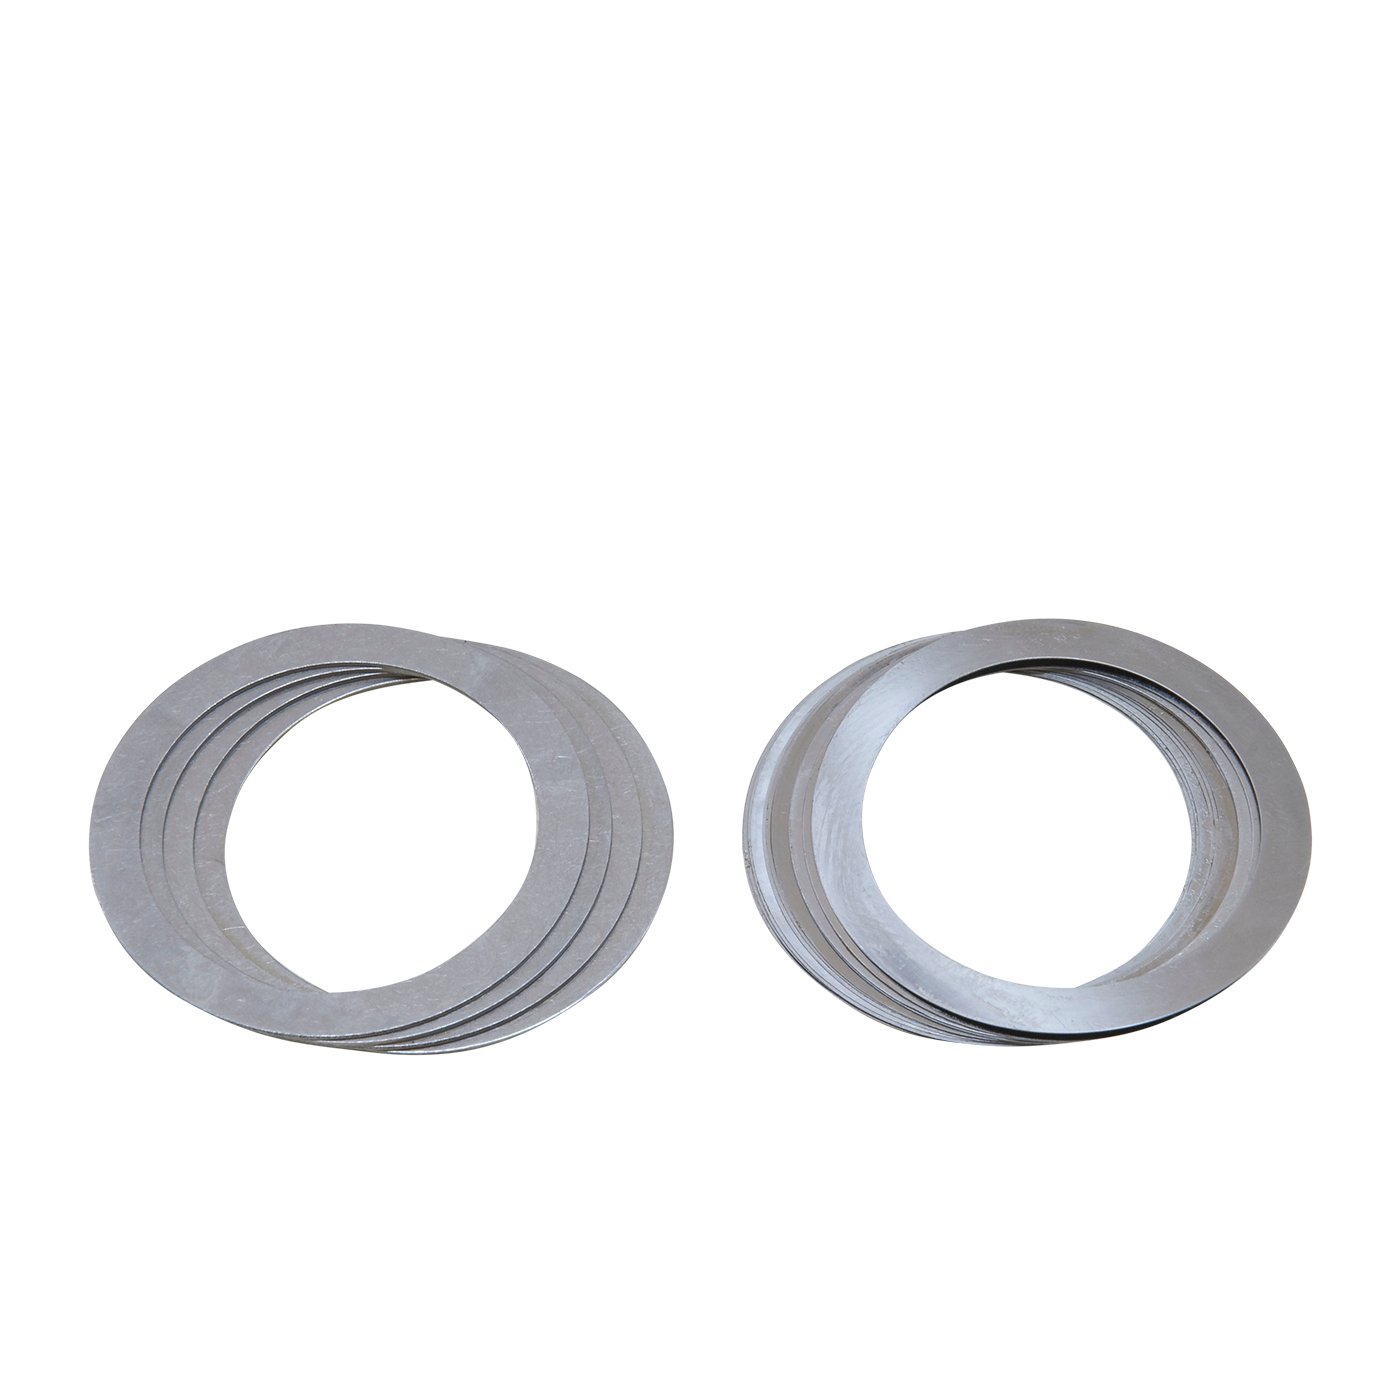 Replacement Carrier Shim Kit For Dana Spicer 44,